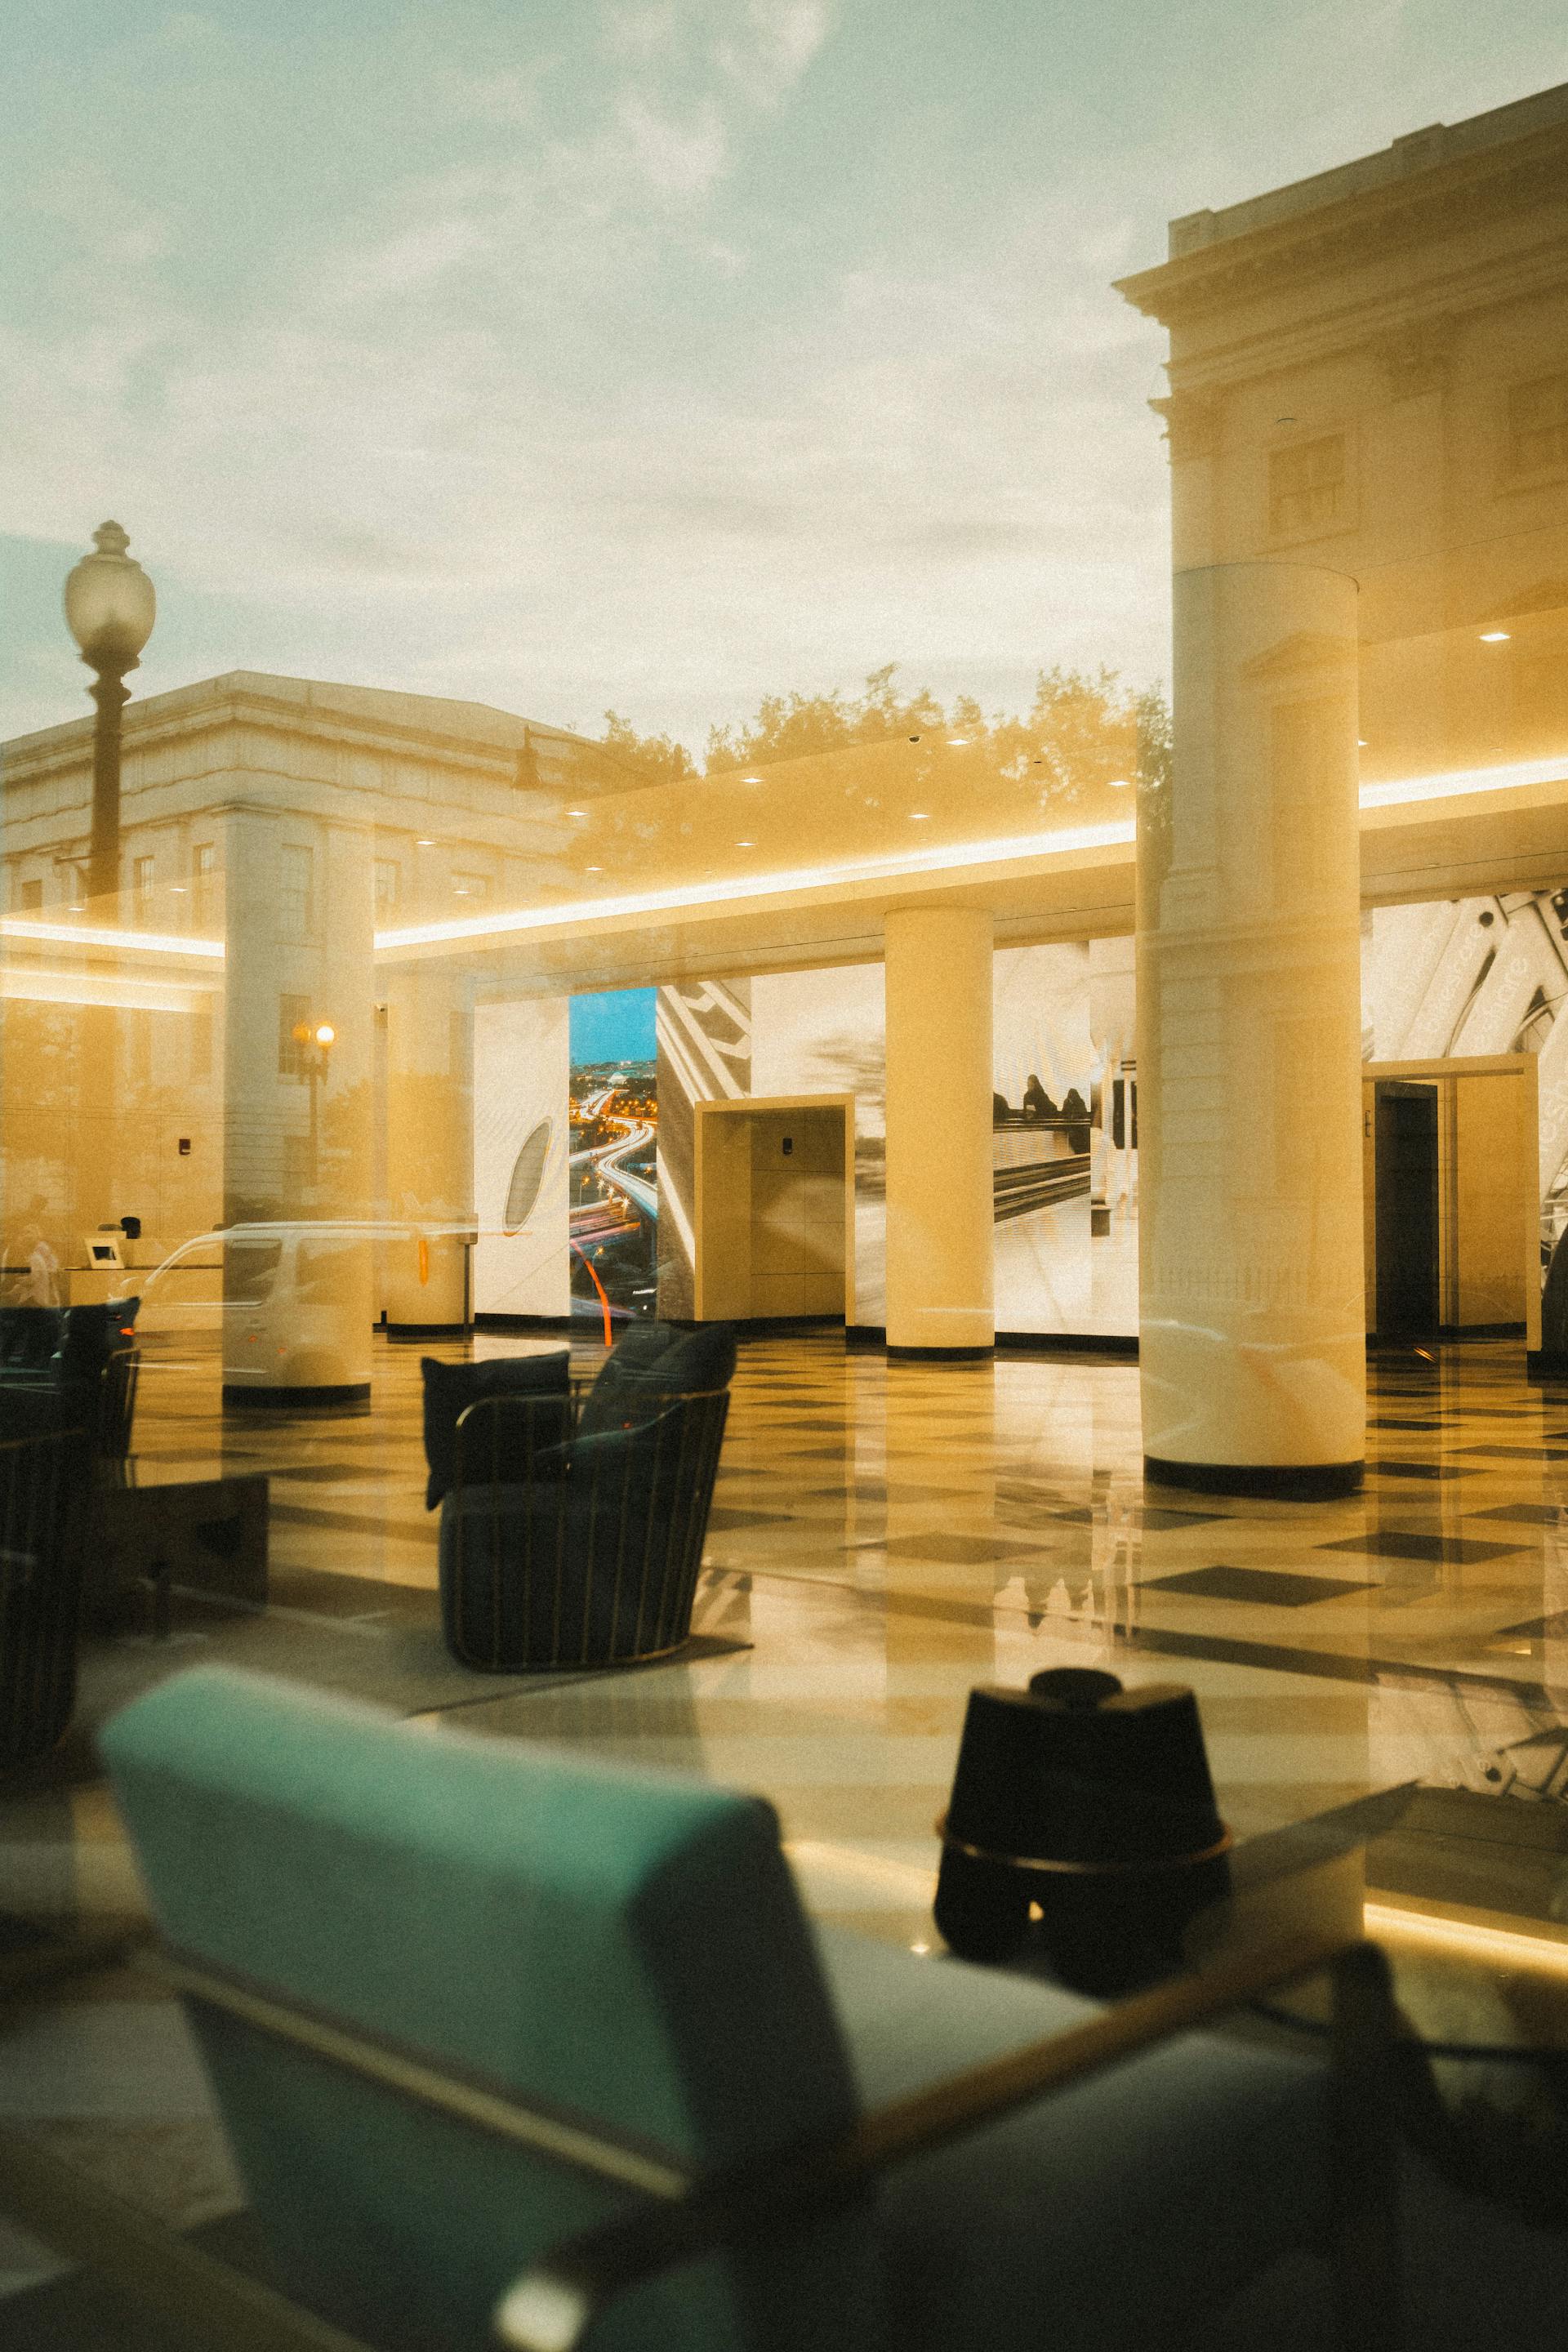 A hotel lobby visible through a window | Source: Pexels